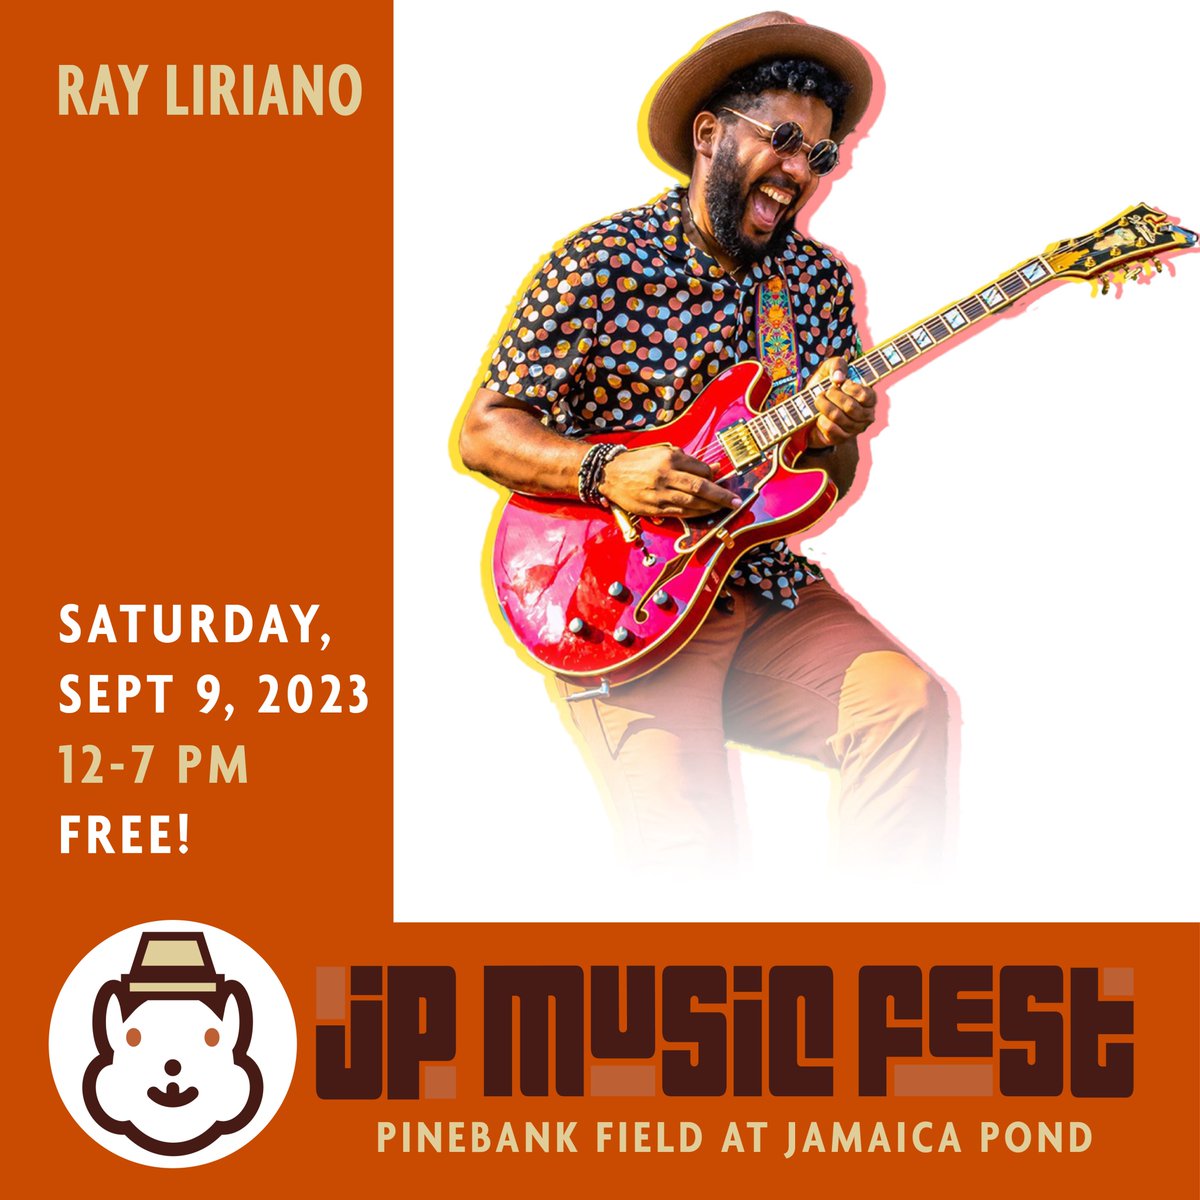 Born and Raised in the Dominican Republic with Latin music all over his DNA. From an early age Ray Liriano was exposed to rock and roll classics like Jimmy Hendrix, Led Zeppelin, Iron Maiden and Latin music legends like Juan Luis Guerra, Franco DeVita, Fito Paez, Hector Lavoe.